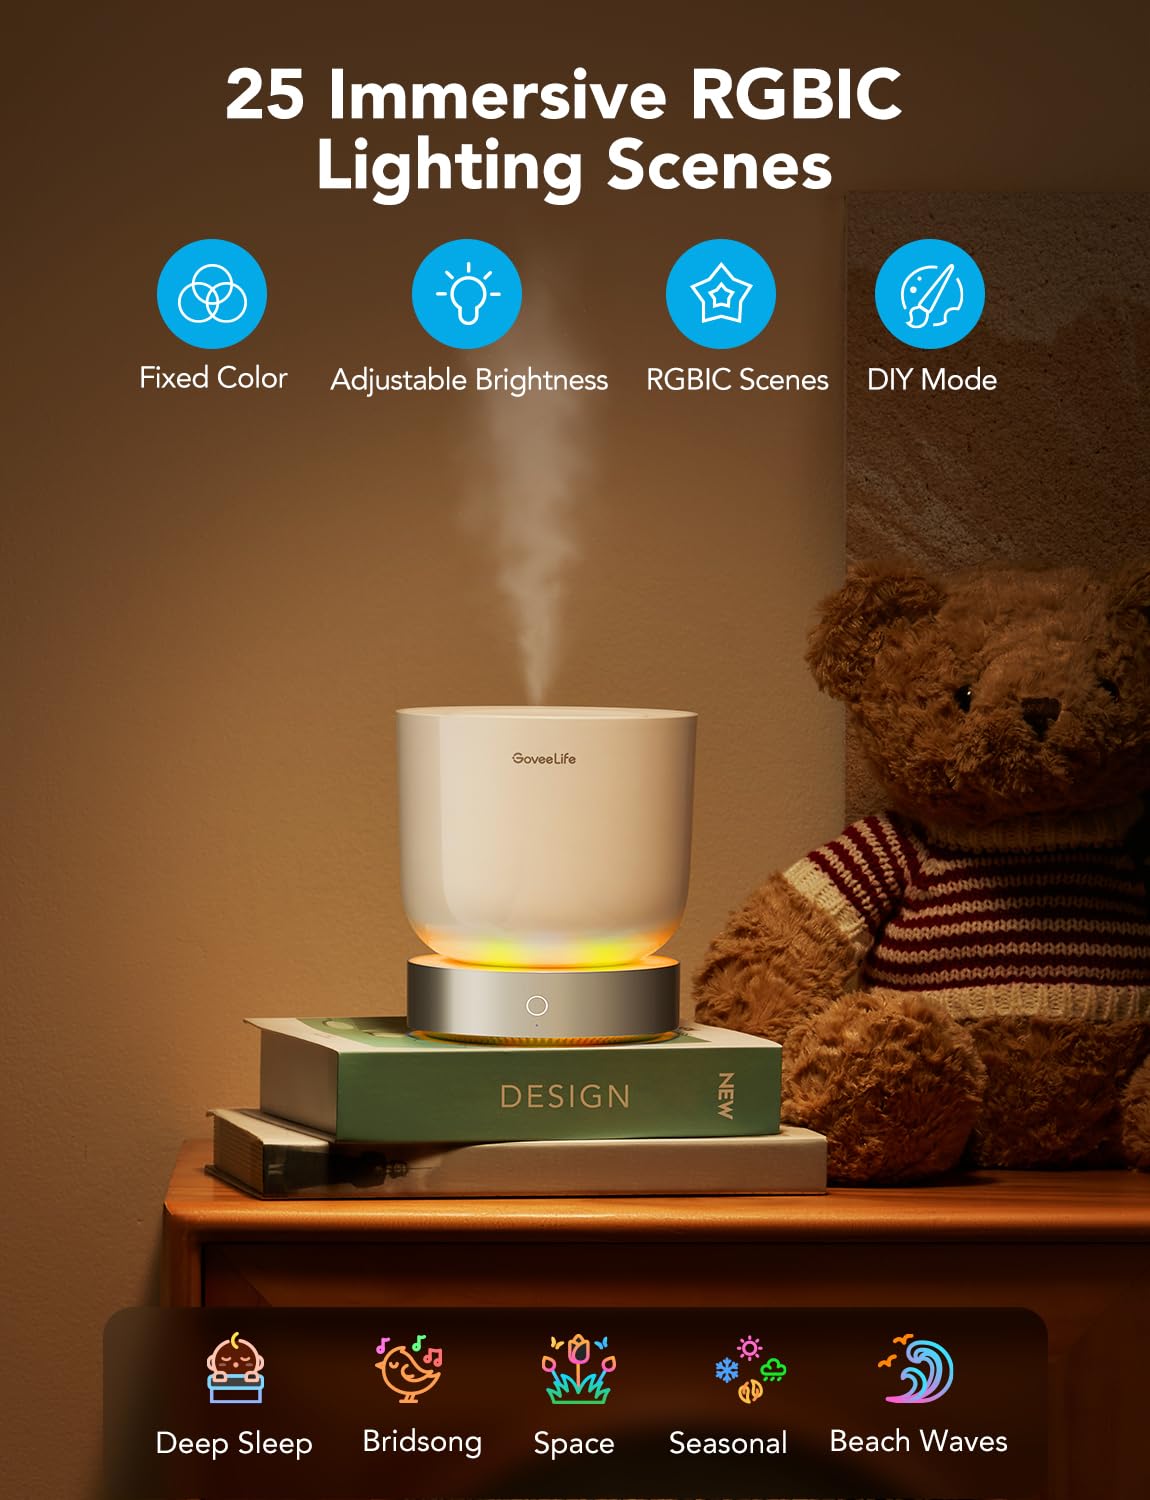 GoveeLife Smart Essential Oil Diffuser with Alexa Voice App Control for Home Office Bedroom, 300ml Quiet Cool Mist Aroma Diffuser with 2 Mist Modes, 24H Timer, RGBIC Light, Waterless Auto Off/Alarm